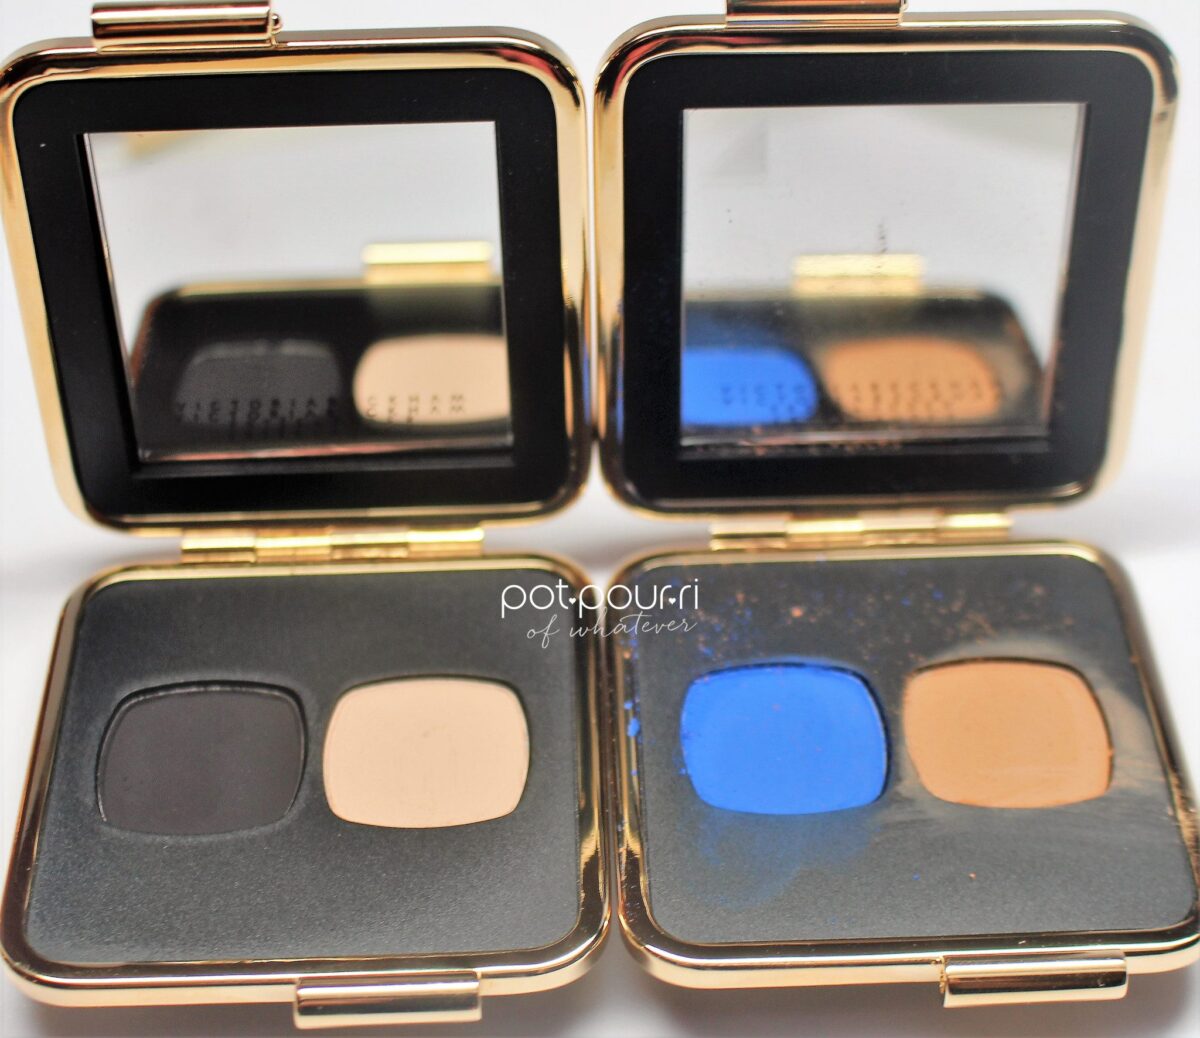 the two palettes I own are the black/cream and the bright blue and camel duos